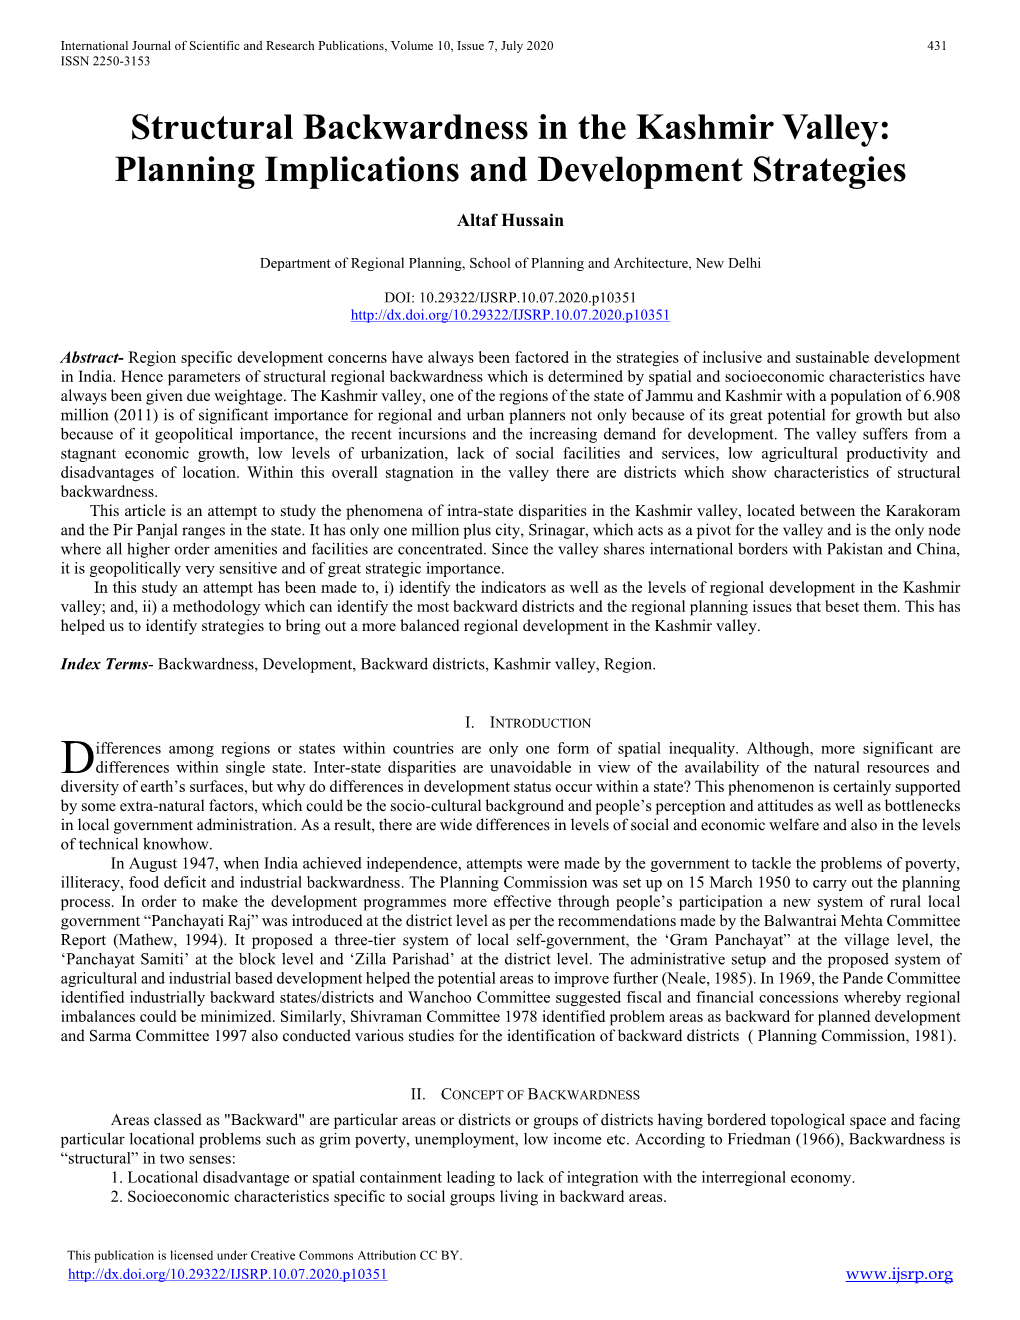 Structural Backwardness in the Kashmir Valley: Planning Implications and Development Strategies